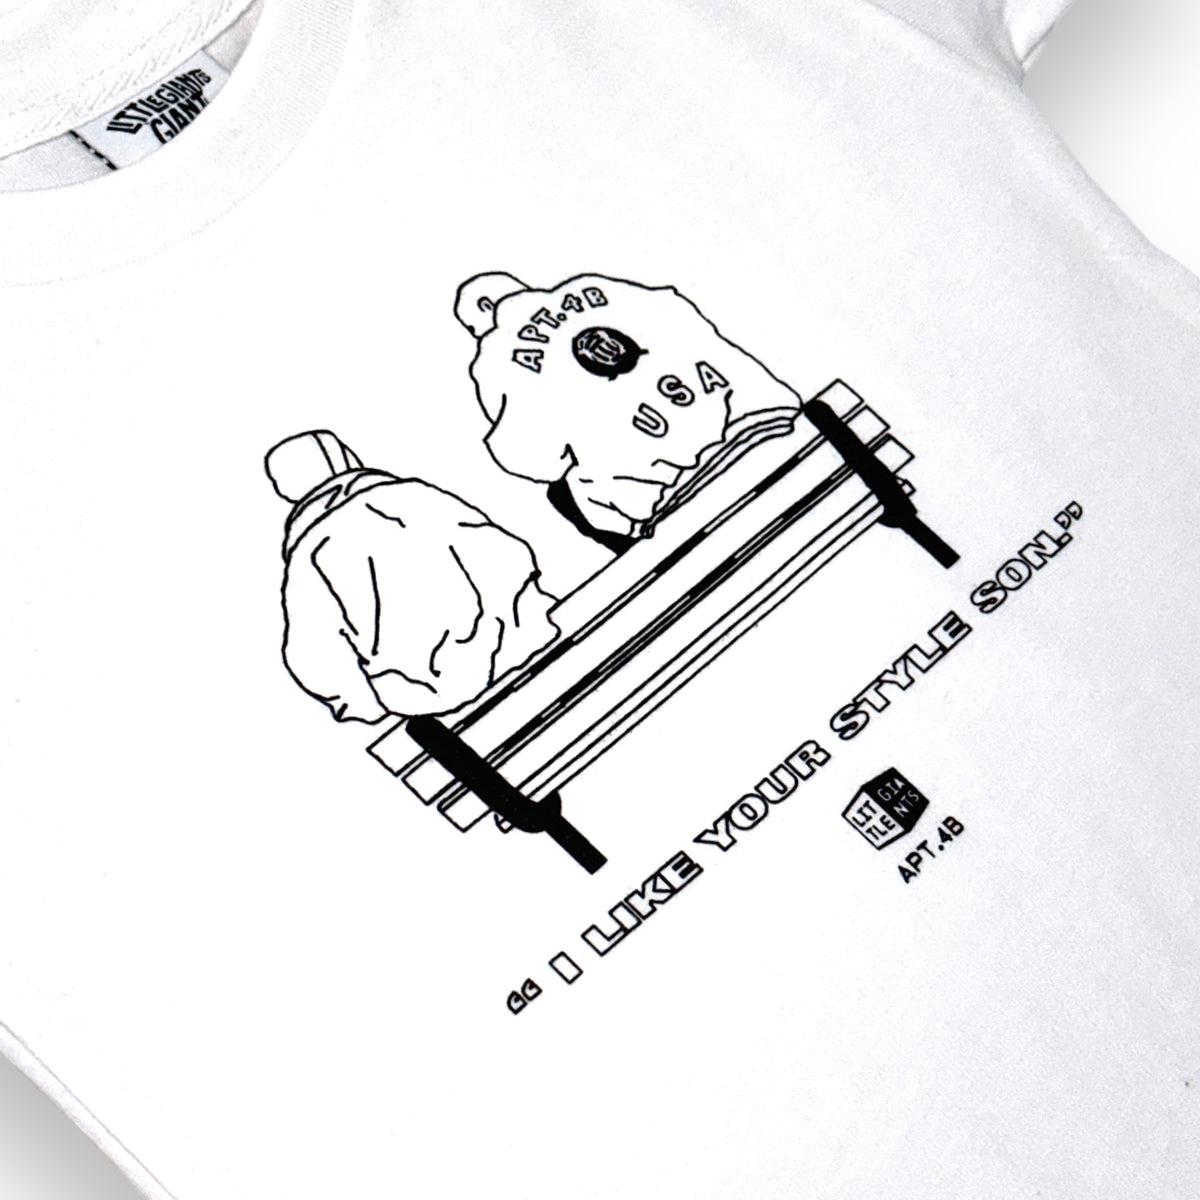 'I Like Your Style' x Apt.4b Collab T-shirt (White)